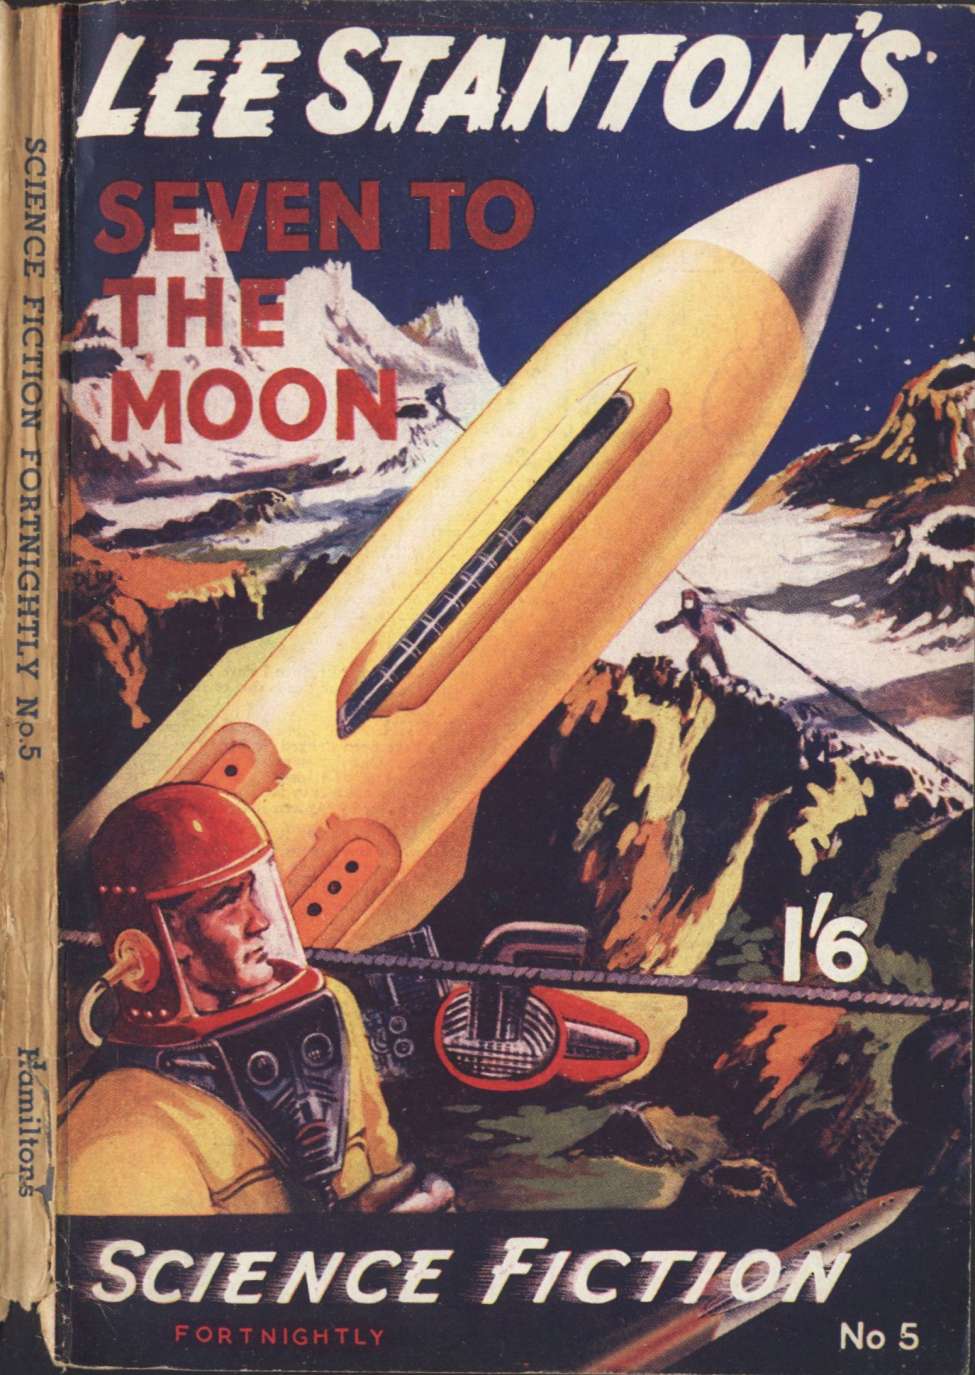 Comic Book Cover For Authentic Science Fiction 5 - Seven to the Moon - Lee Stanton